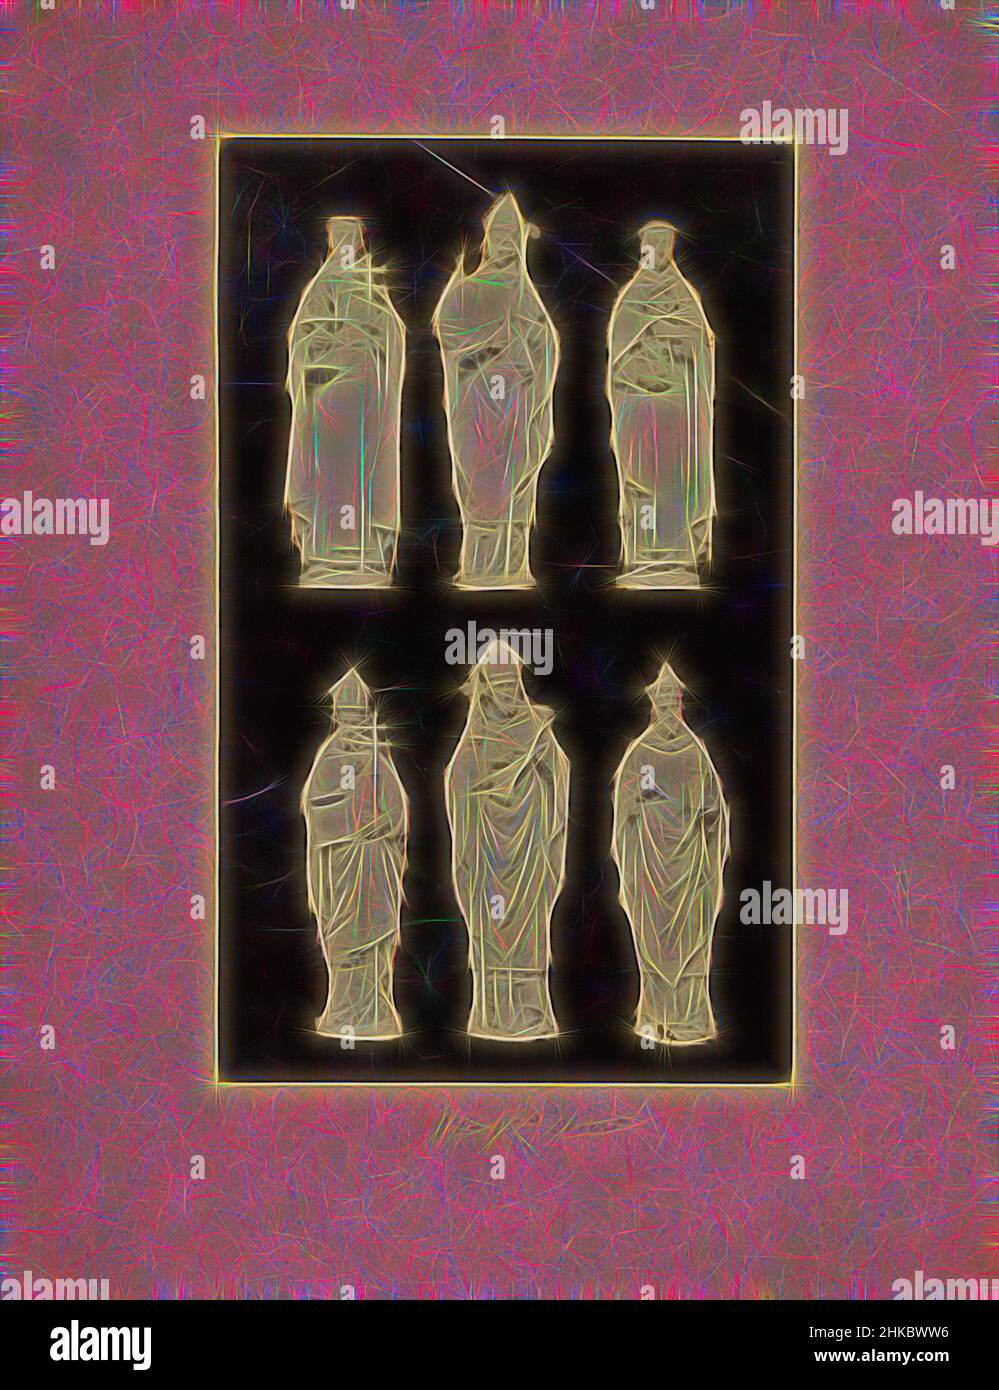 Inspired by Six sculptures of bishops and clergy of St. John's Cathedral in 's-Hertogenbosch, c. 1875 - c. 1900, albumen print, height 213 mm × width 129 mm, Reimagined by Artotop. Classic art reinvented with a modern twist. Design of warm cheerful glowing of brightness and light ray radiance. Photography inspired by surrealism and futurism, embracing dynamic energy of modern technology, movement, speed and revolutionize culture Stock Photo